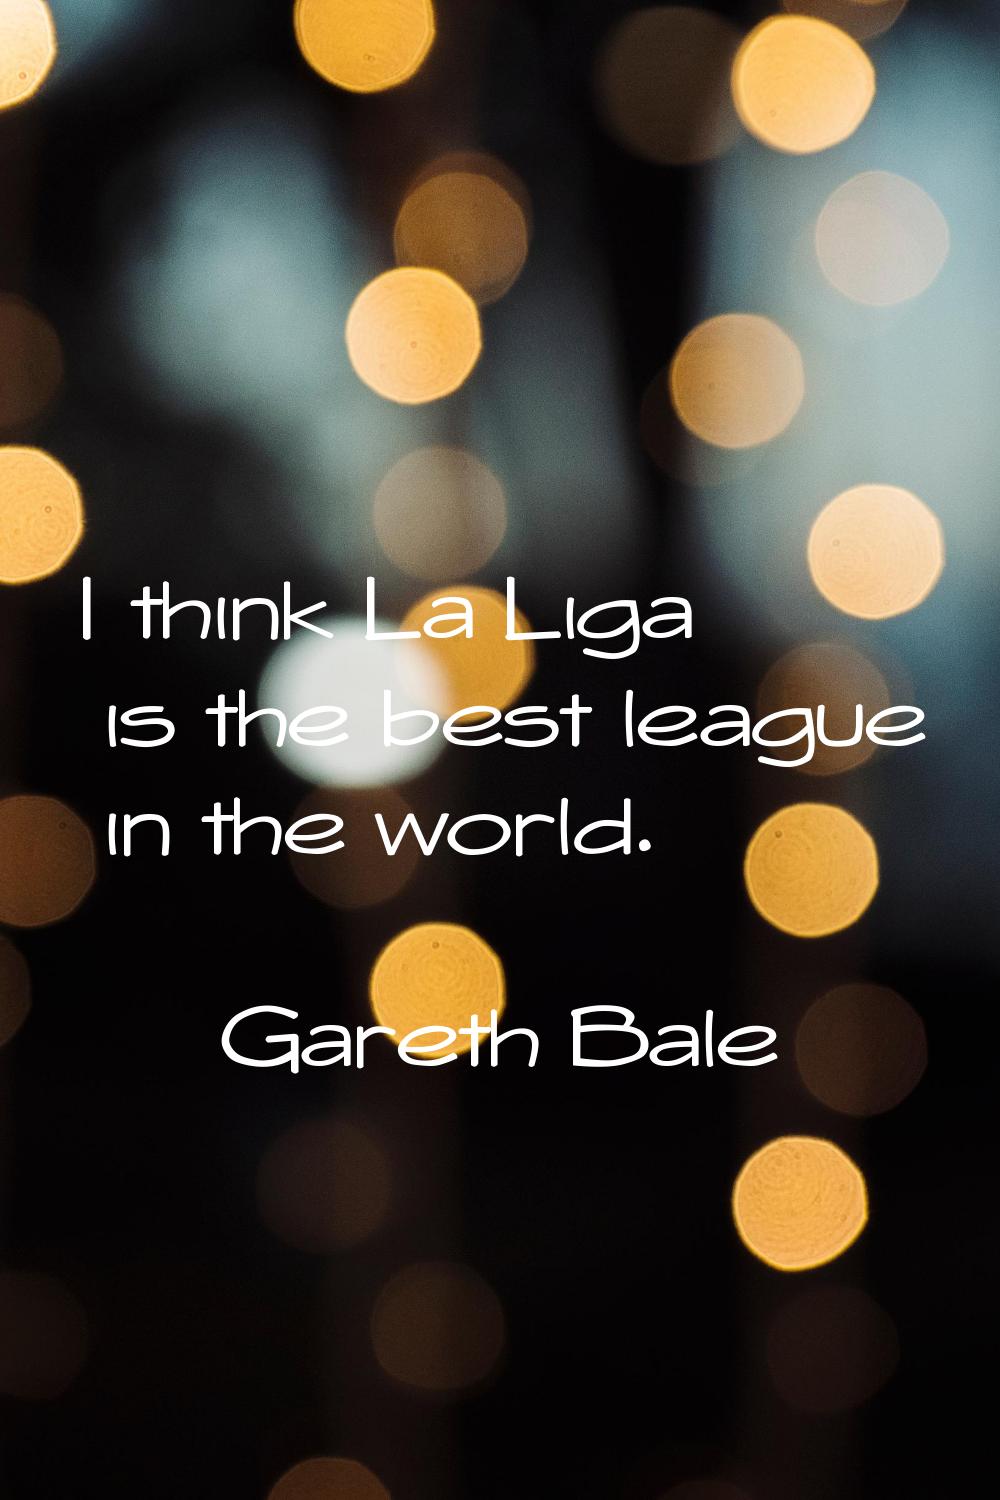 I think La Liga is the best league in the world.